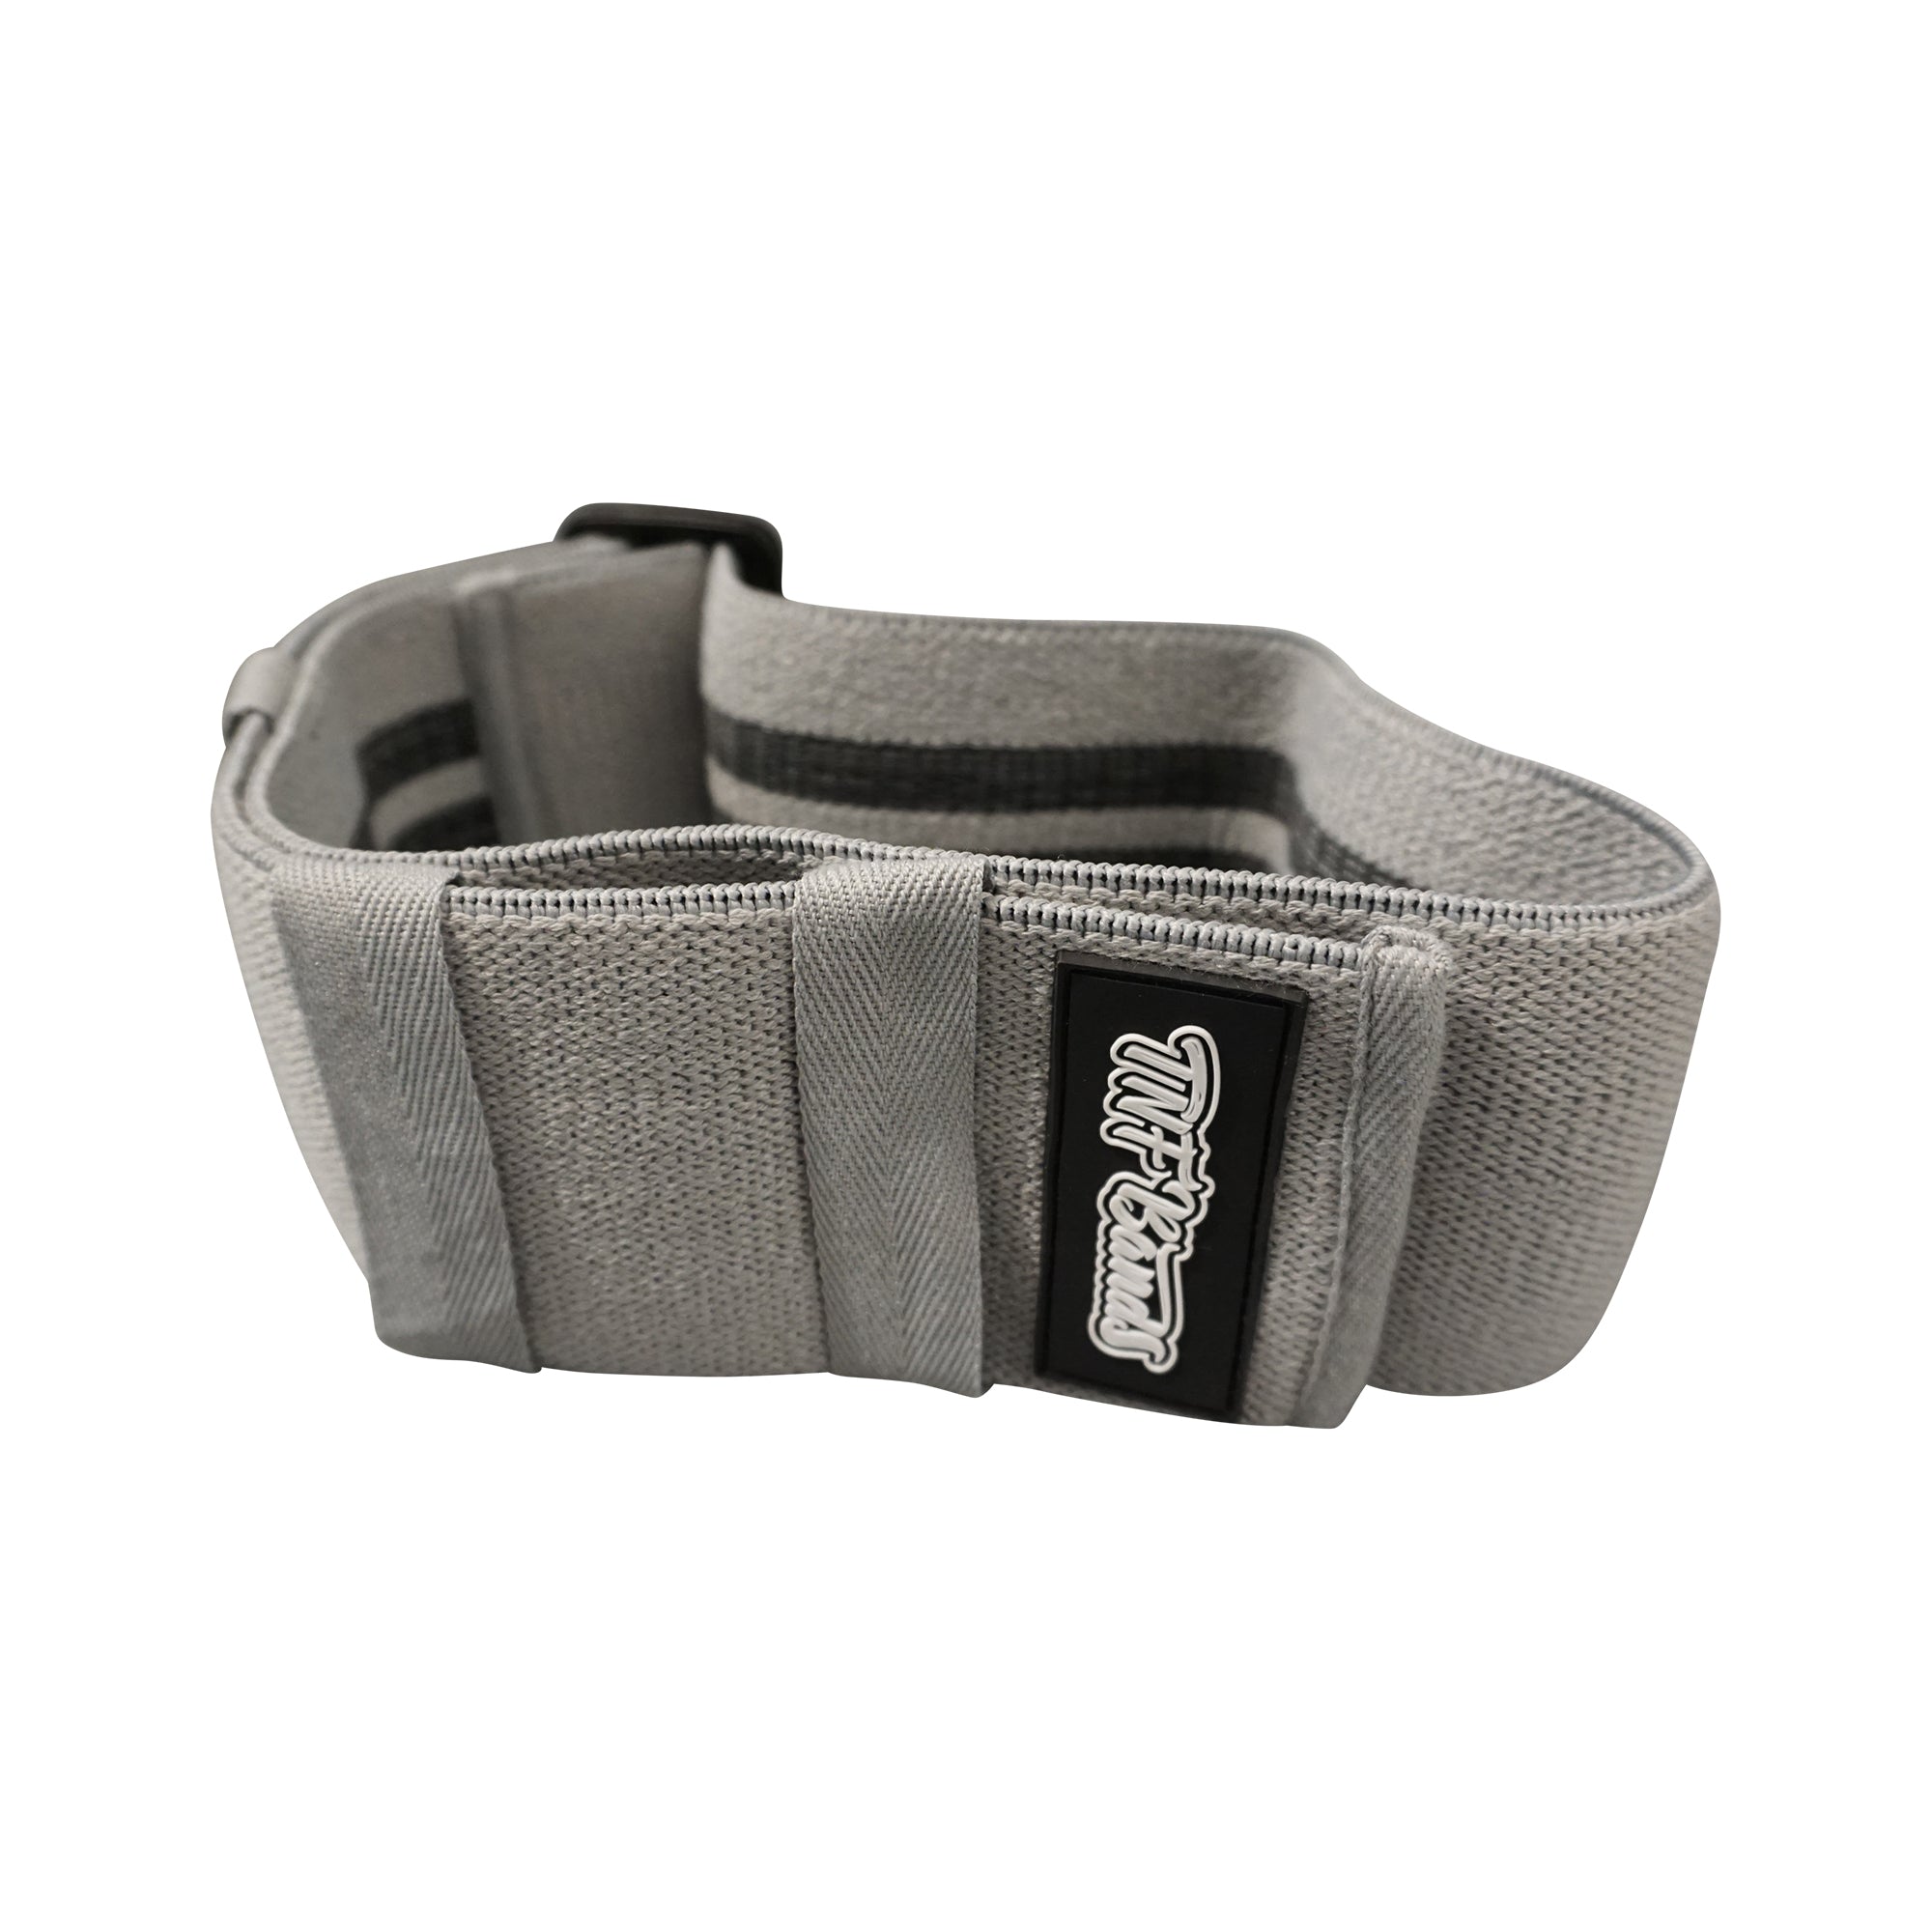 TNF Bands Adjustable Resistance Band (1 band) tnf-bands-adjustable-resistance-band-1-band Fitness Accessories Grey TNF Bands